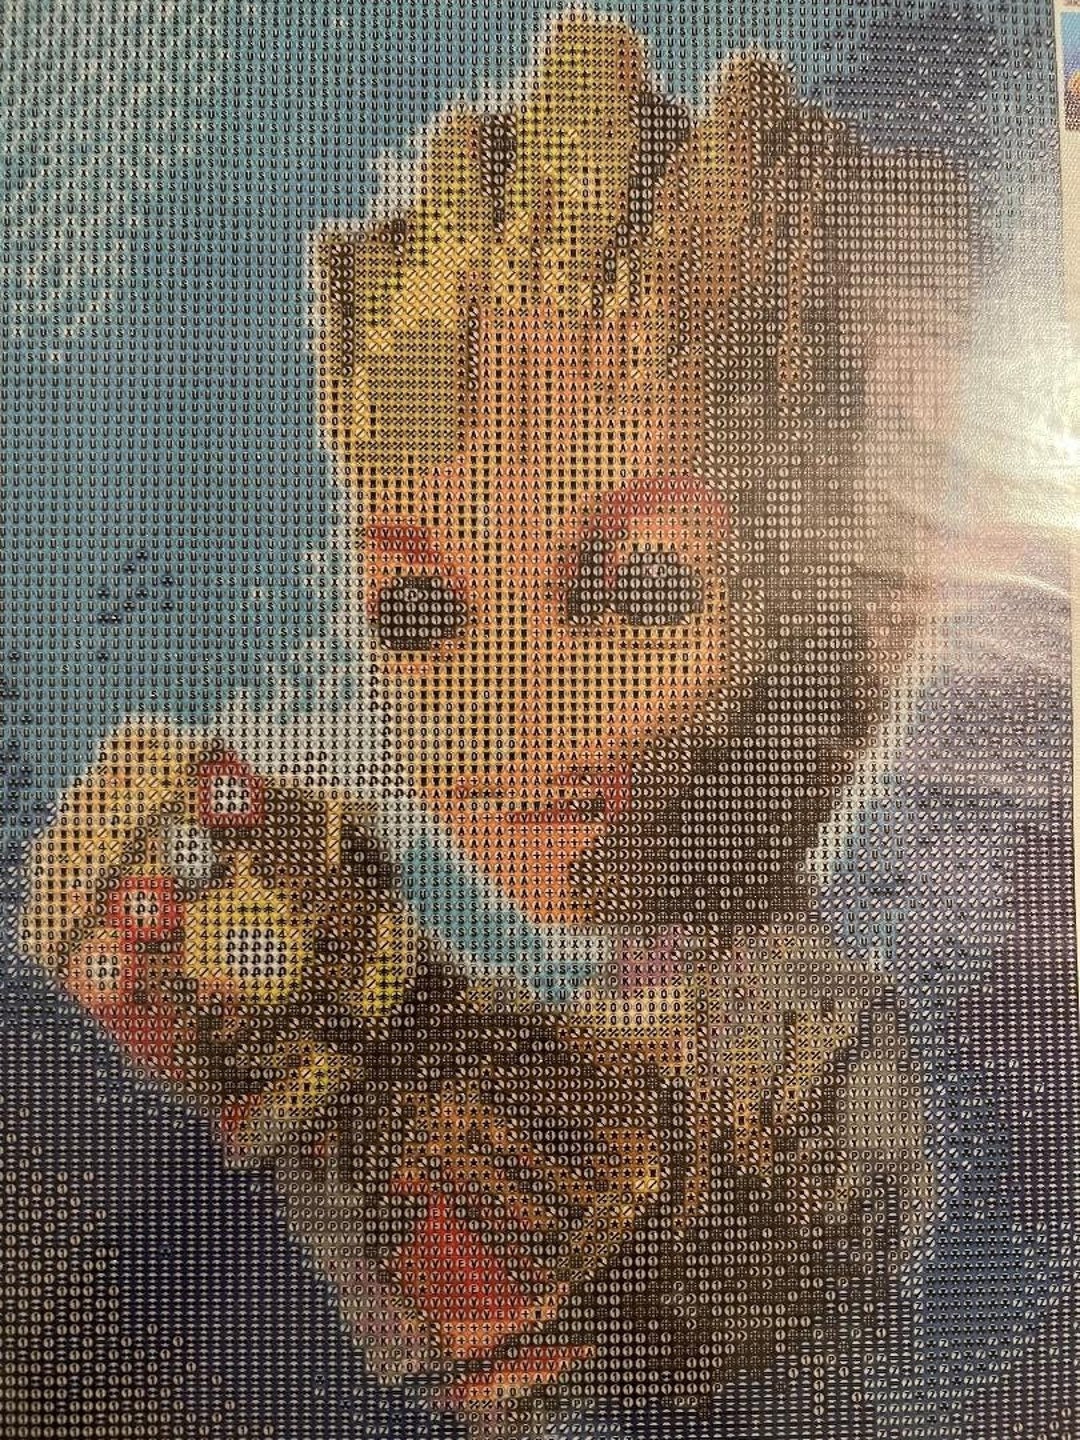 Completed Groot 3D Diamond Painting Baby Groot Painting With Diamonds Comic  Diamond Gifts Kids Decor Groot Wall Hanging 